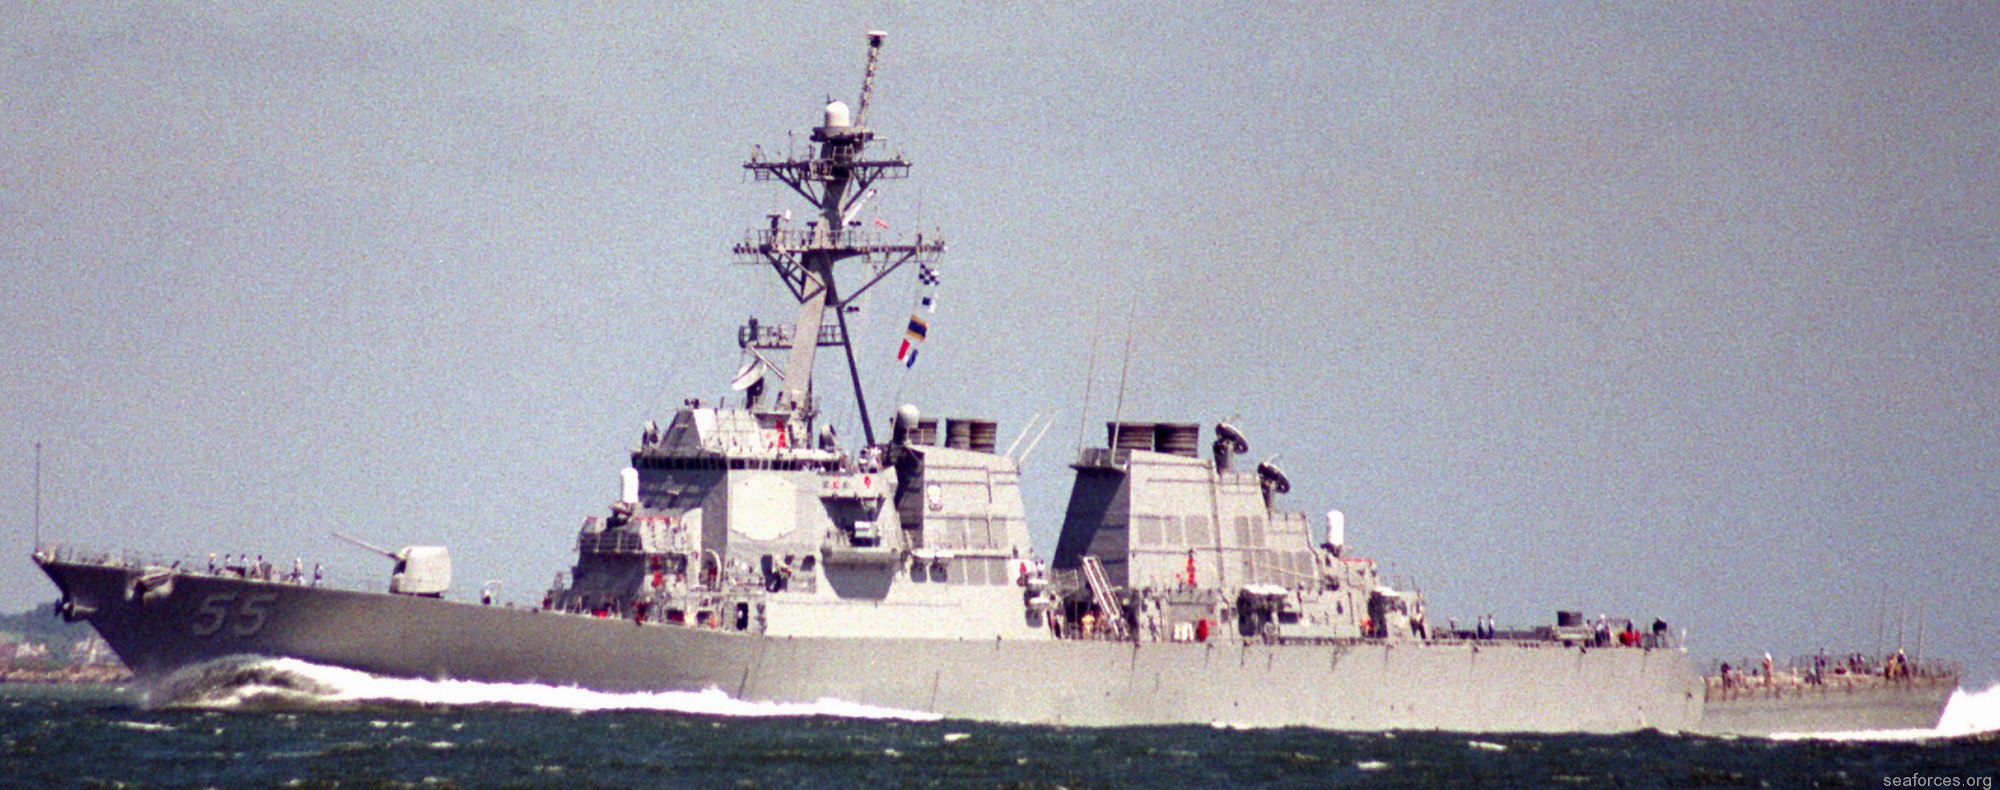 ddg-55 uss stout guided missile destroyer us navy 92